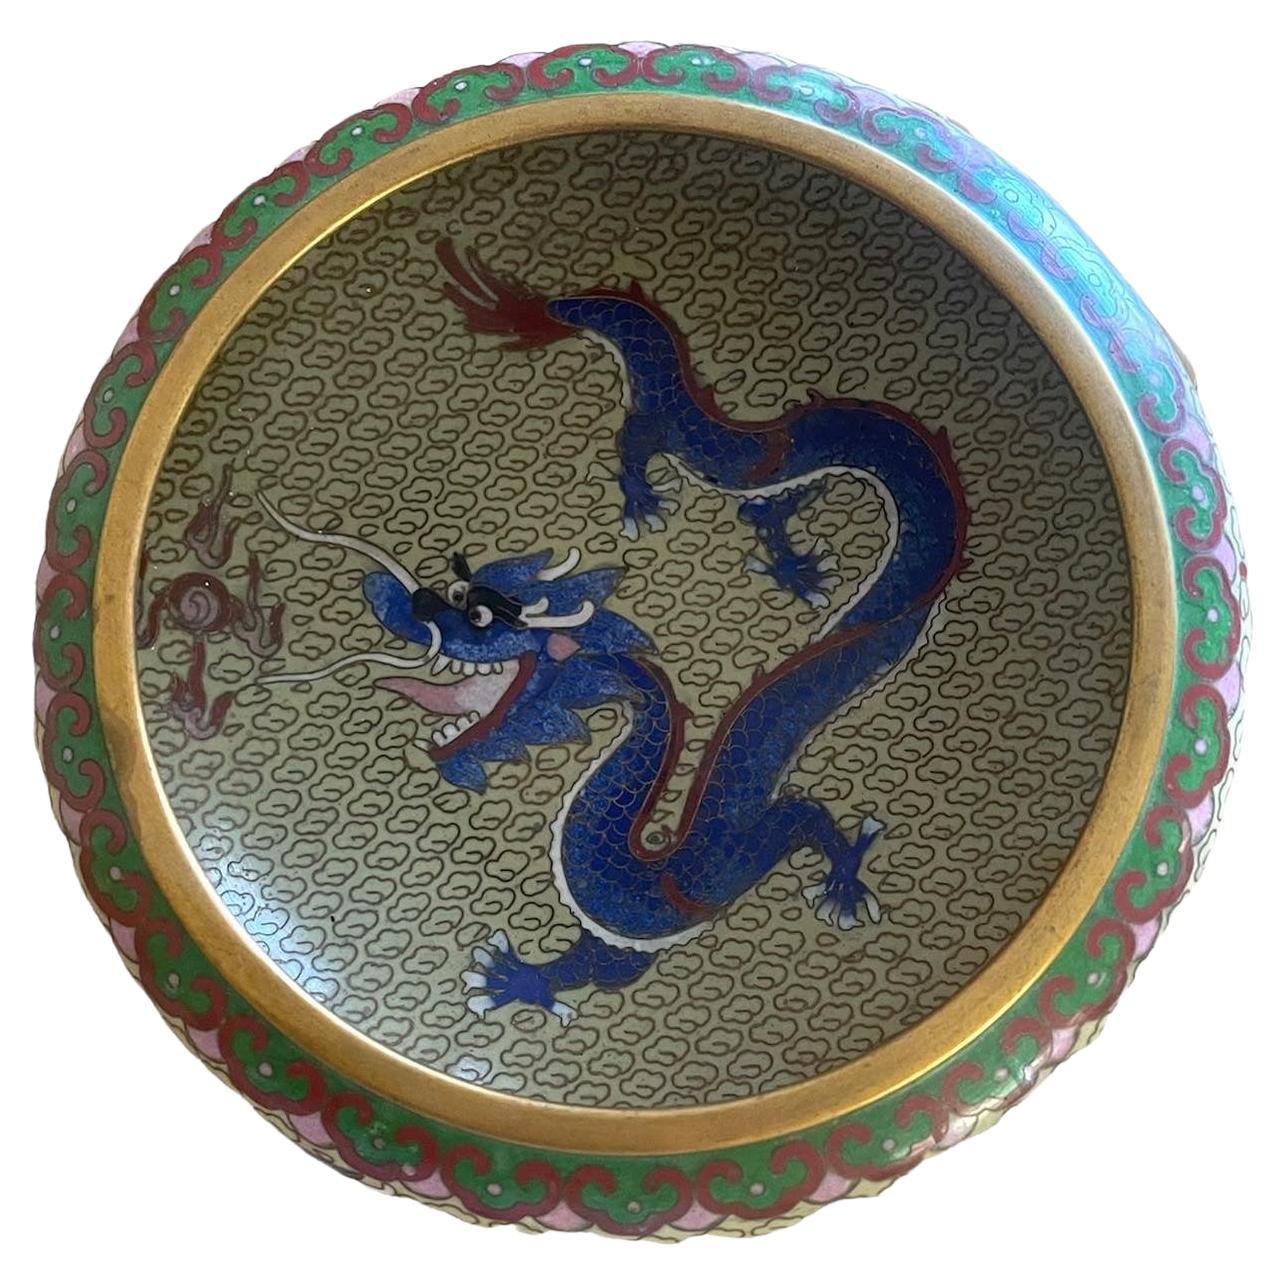 Chinese Cloisonne bowl dragon early 20th century turquoise blue dragon. Could be depiction of Qing Dynasty though I am unsure of that.
Stand included.